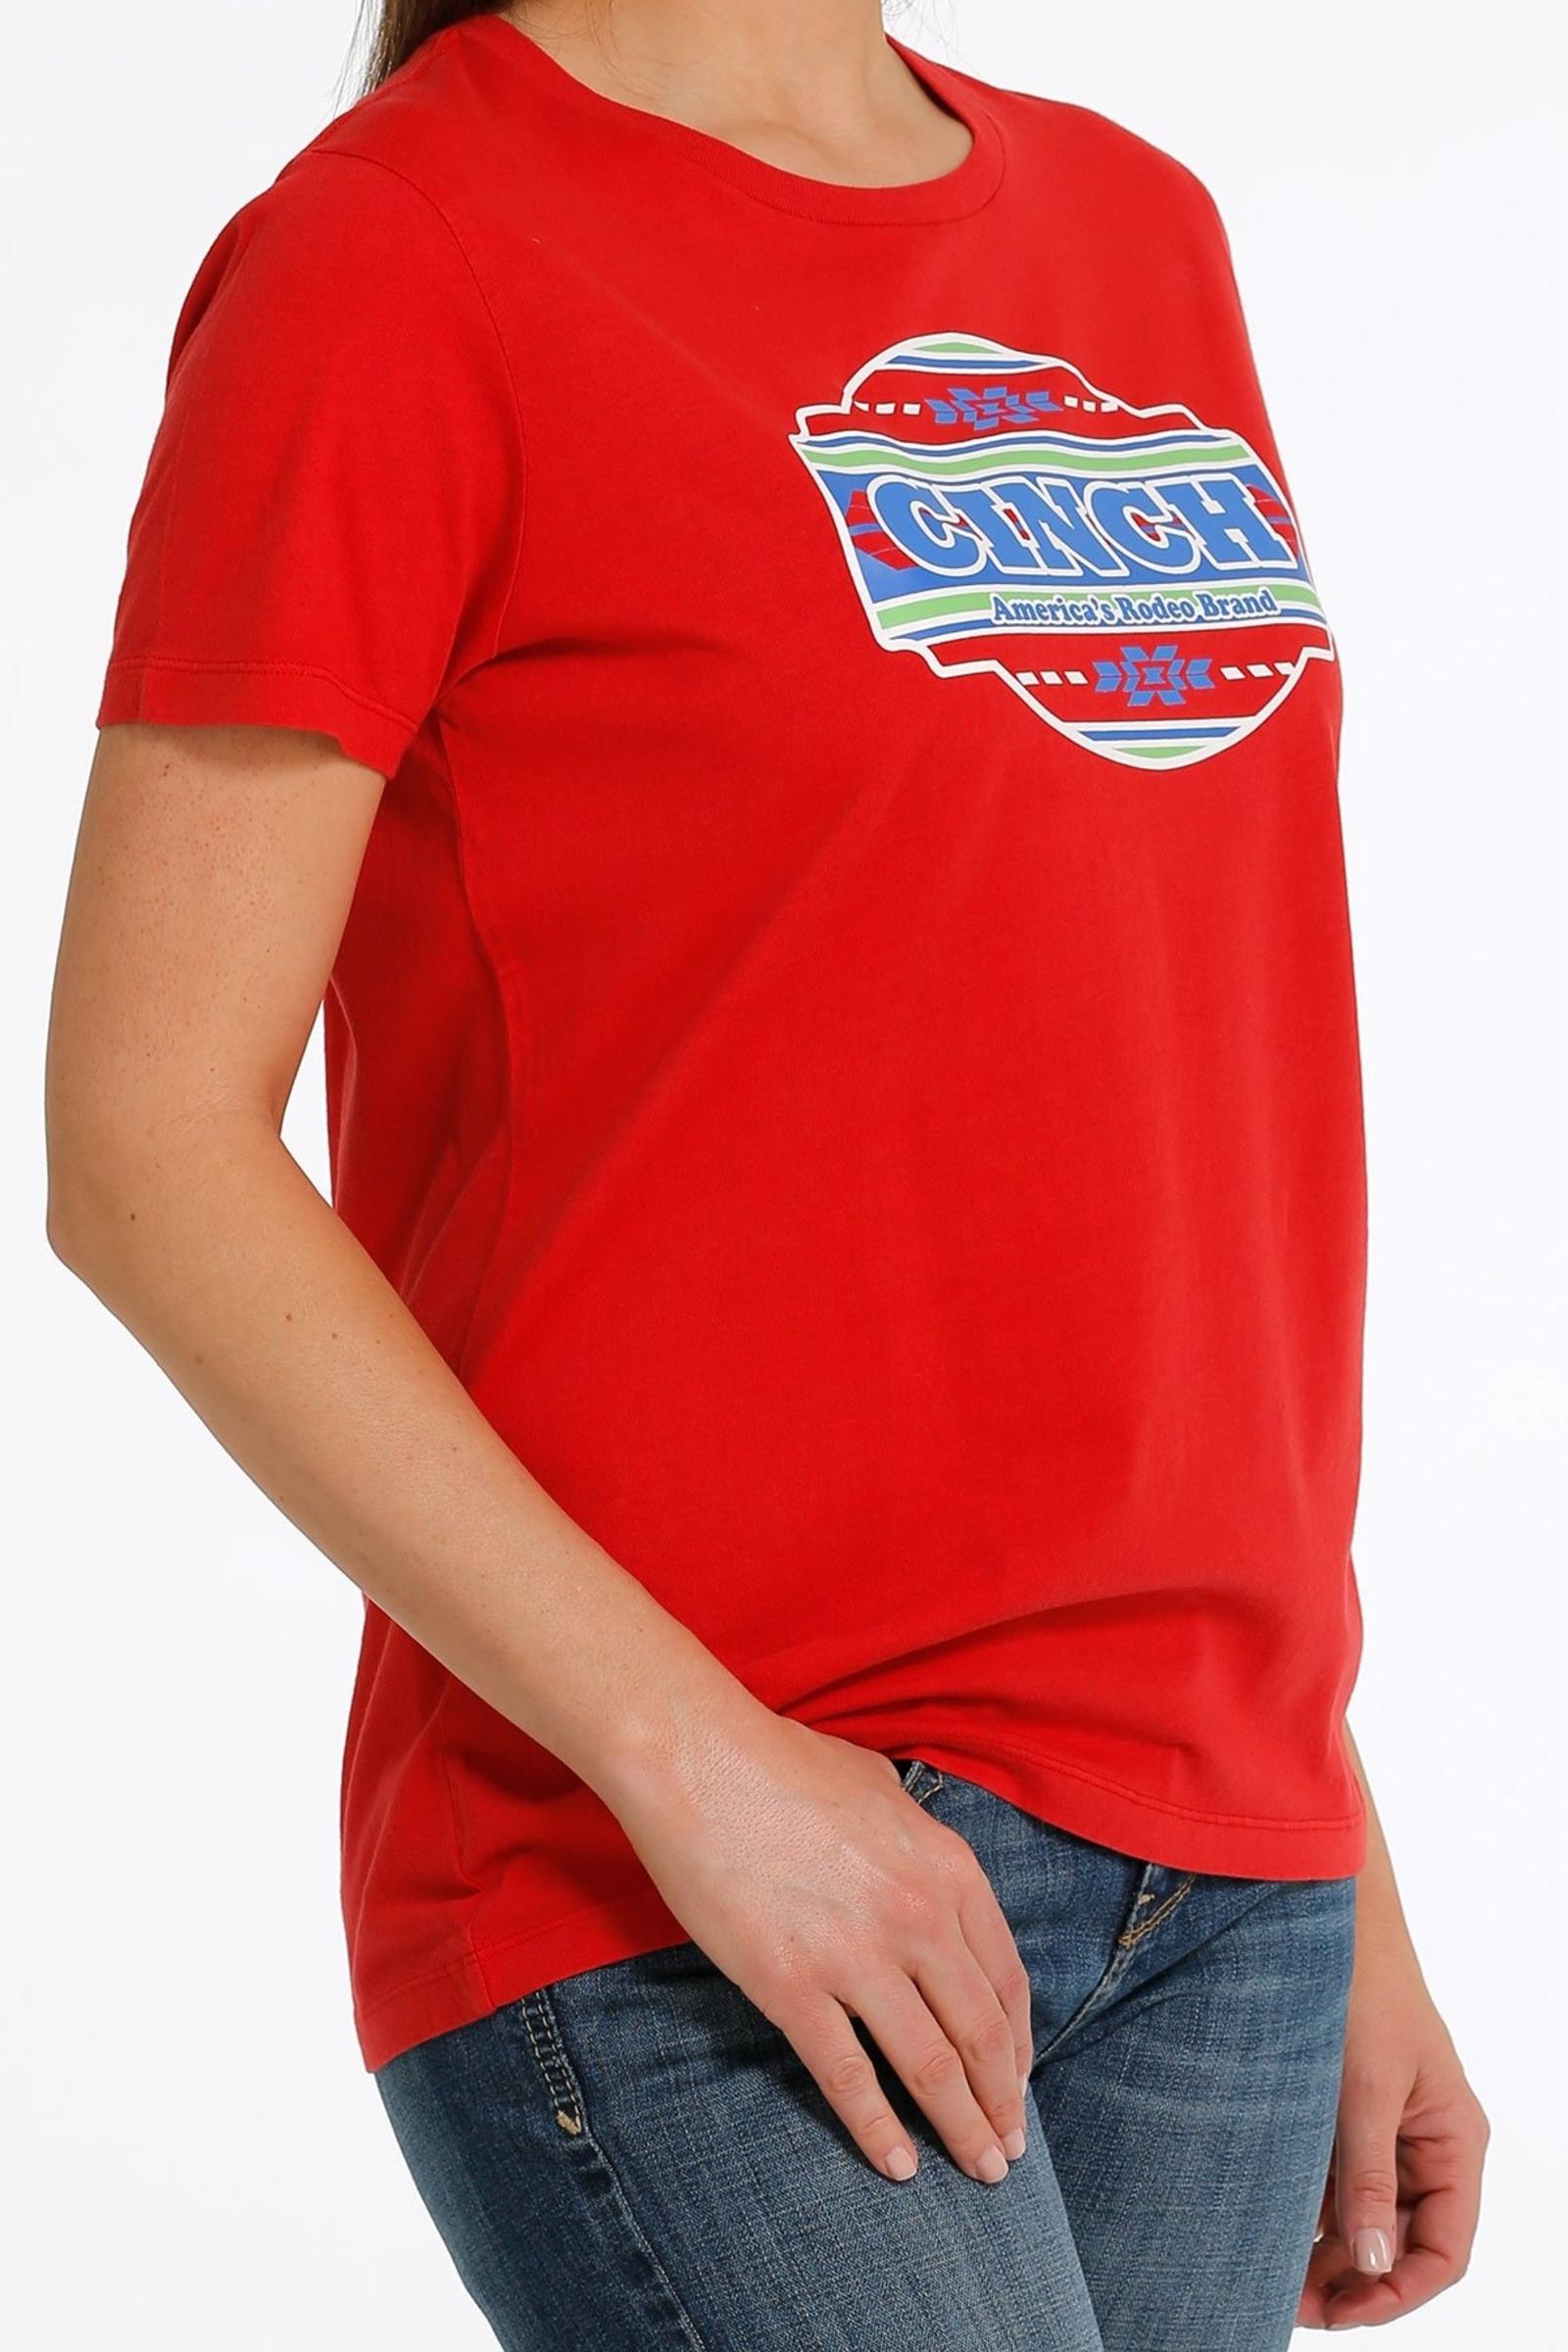 WOMEN'S CINCH AUTHENTIC RODEO BRAND TEE - RED